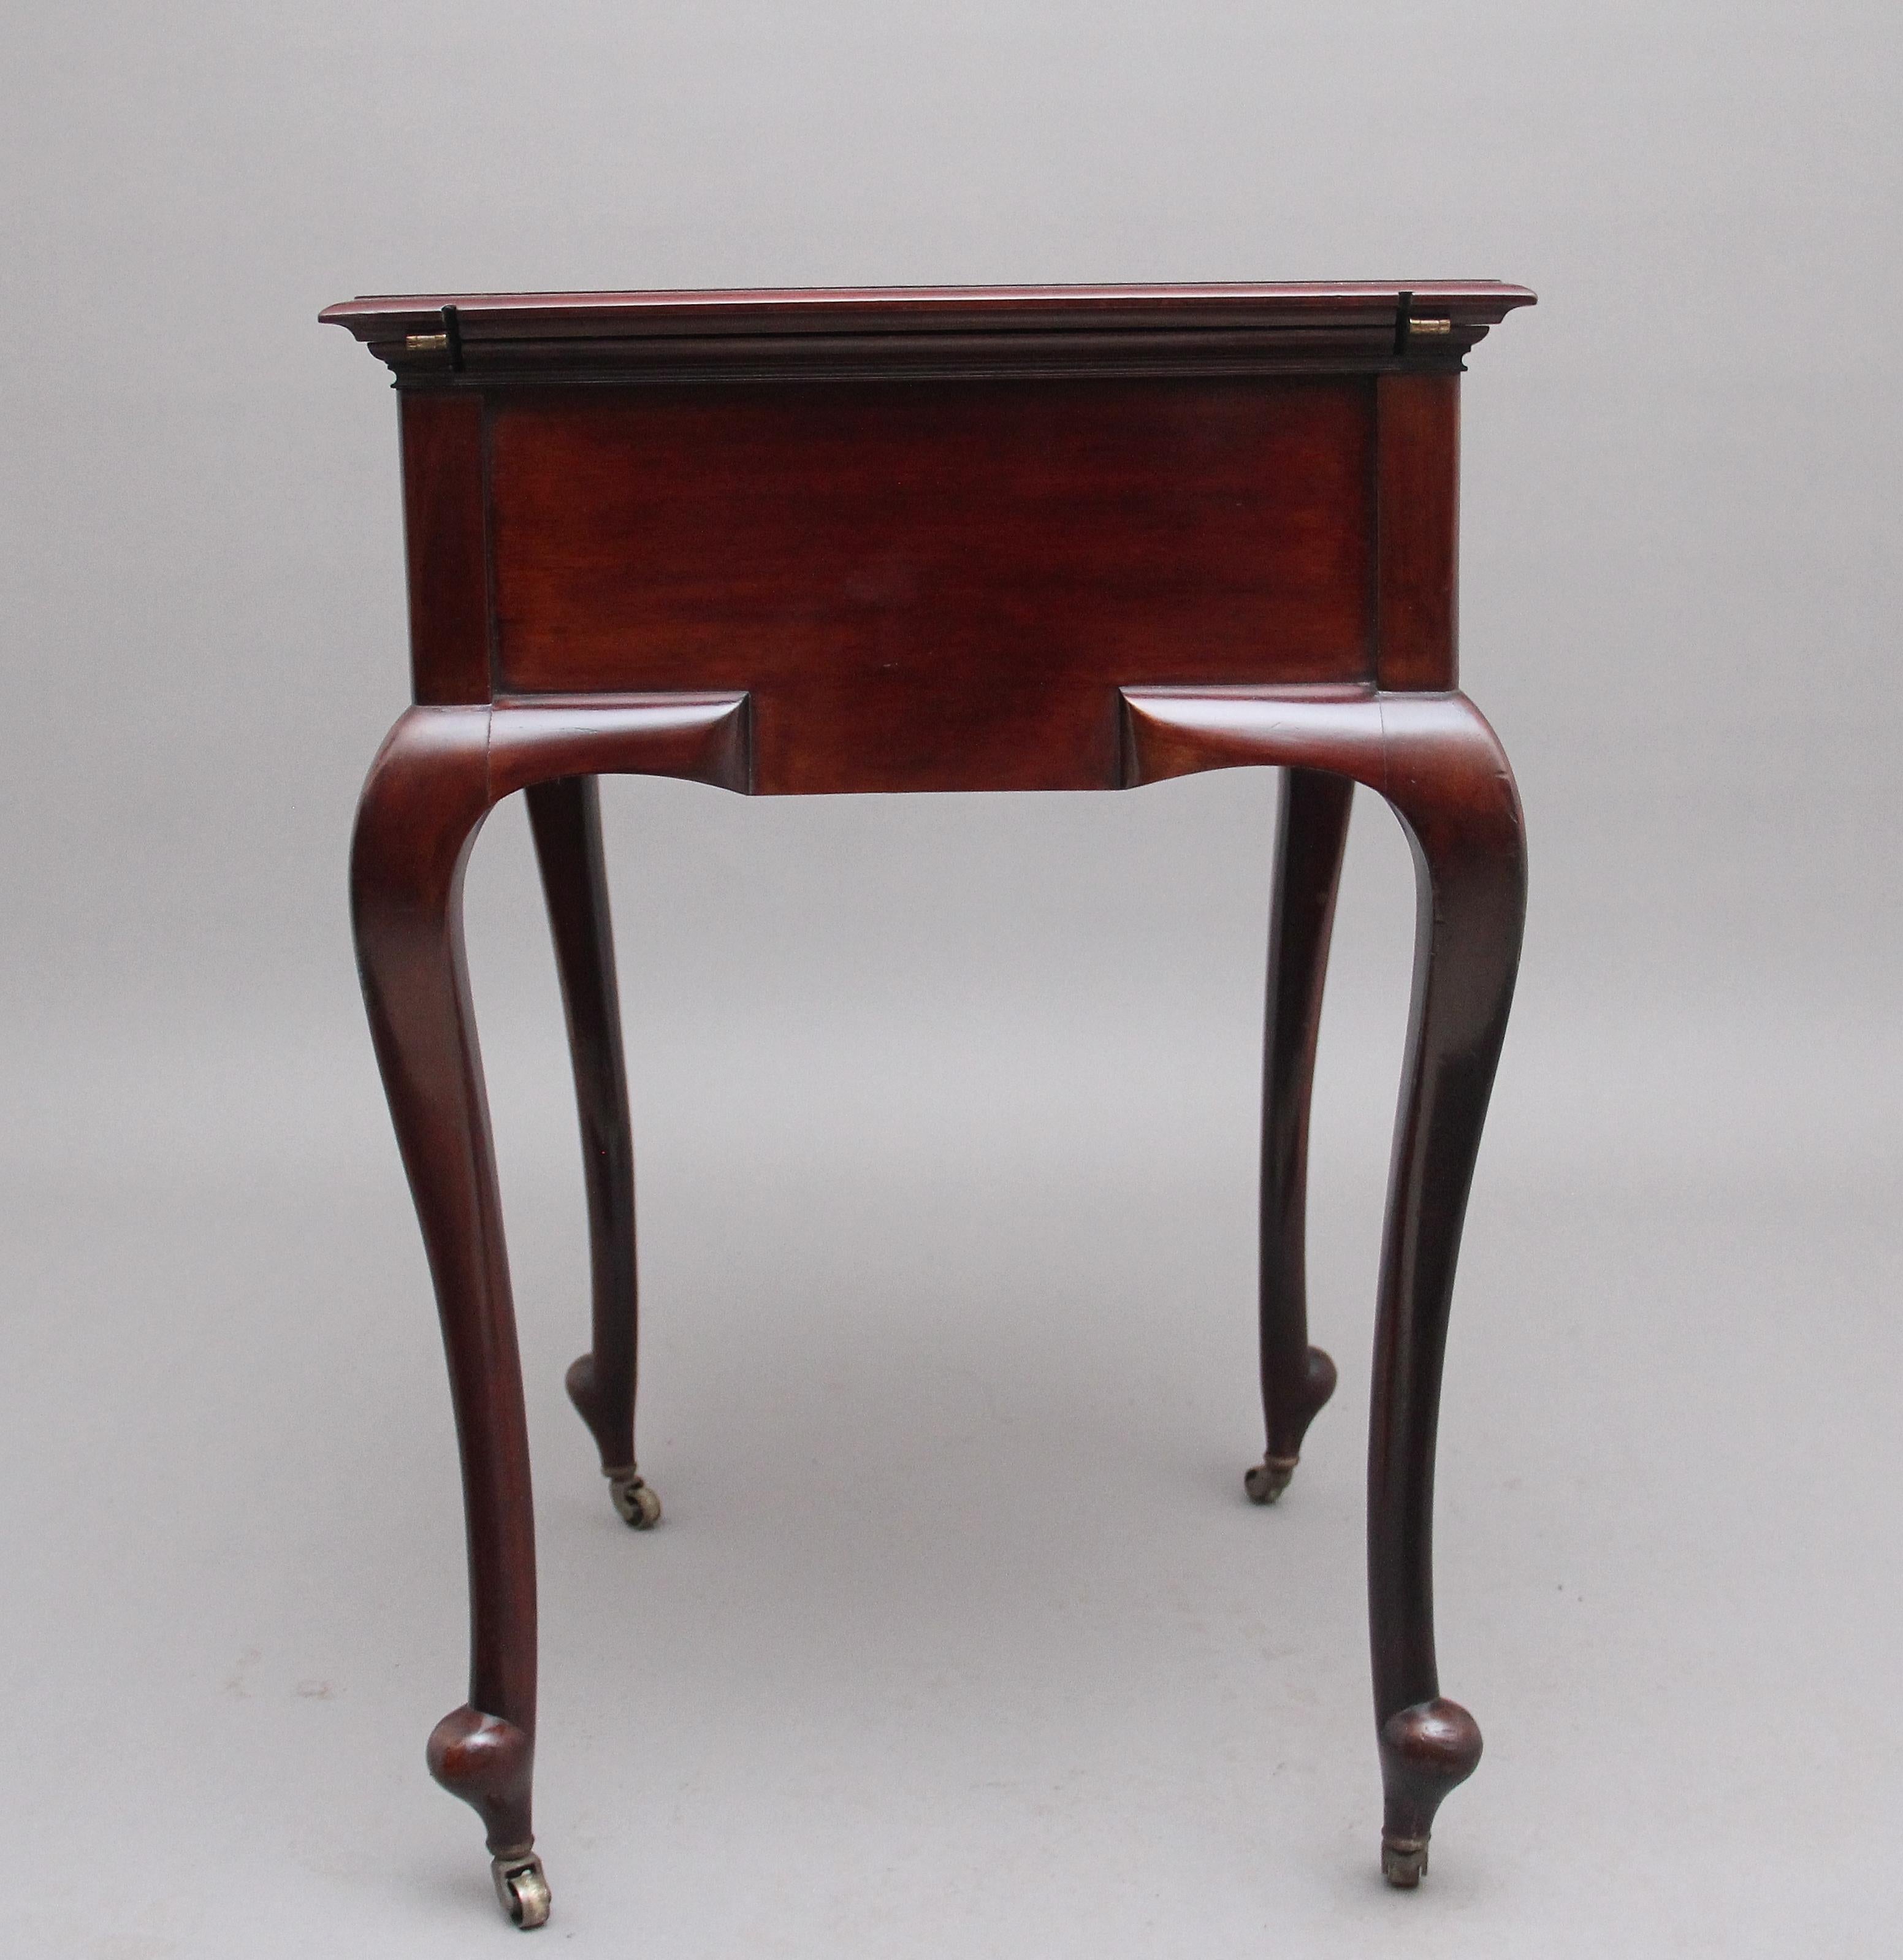 European Early 20th Century Metamorphic Writing Desk by J.C Vickery of London For Sale